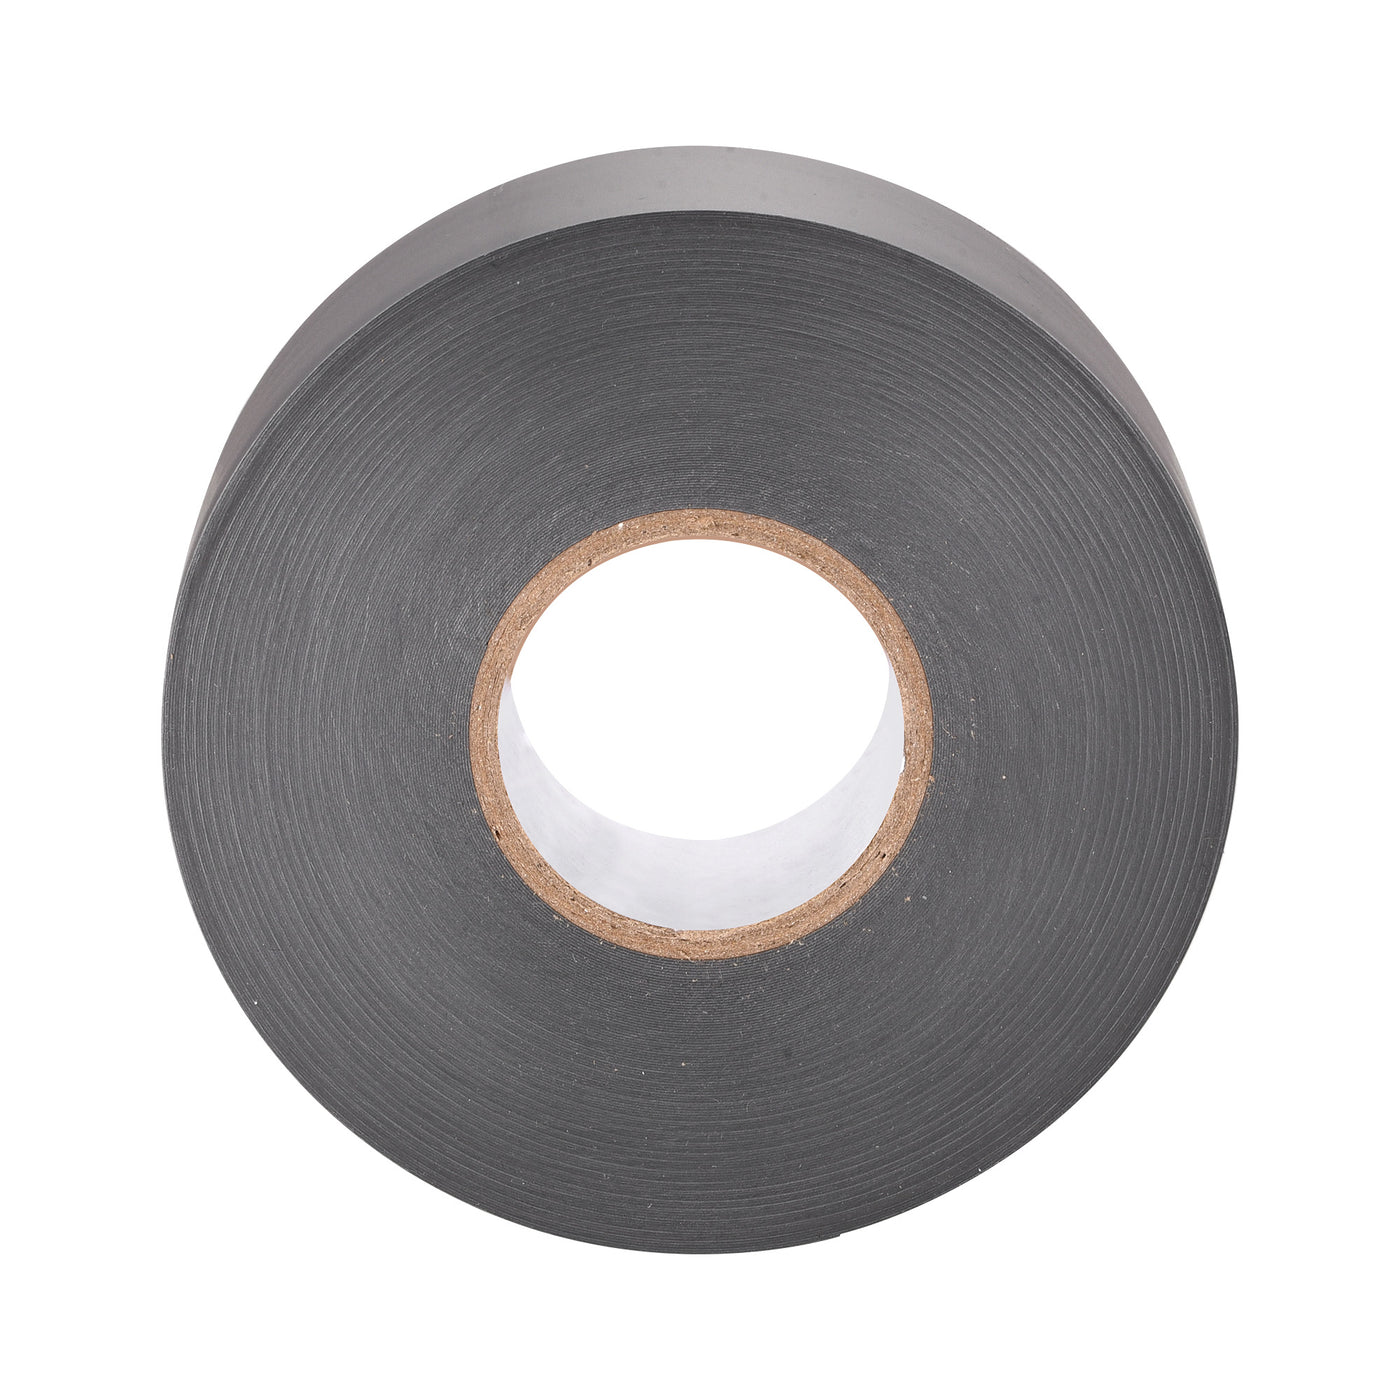 uxcell Uxcell Insulating Tape 10mm Width 26M Long 0.26mm Thick PVC Electrical Tape Grey 3pcs